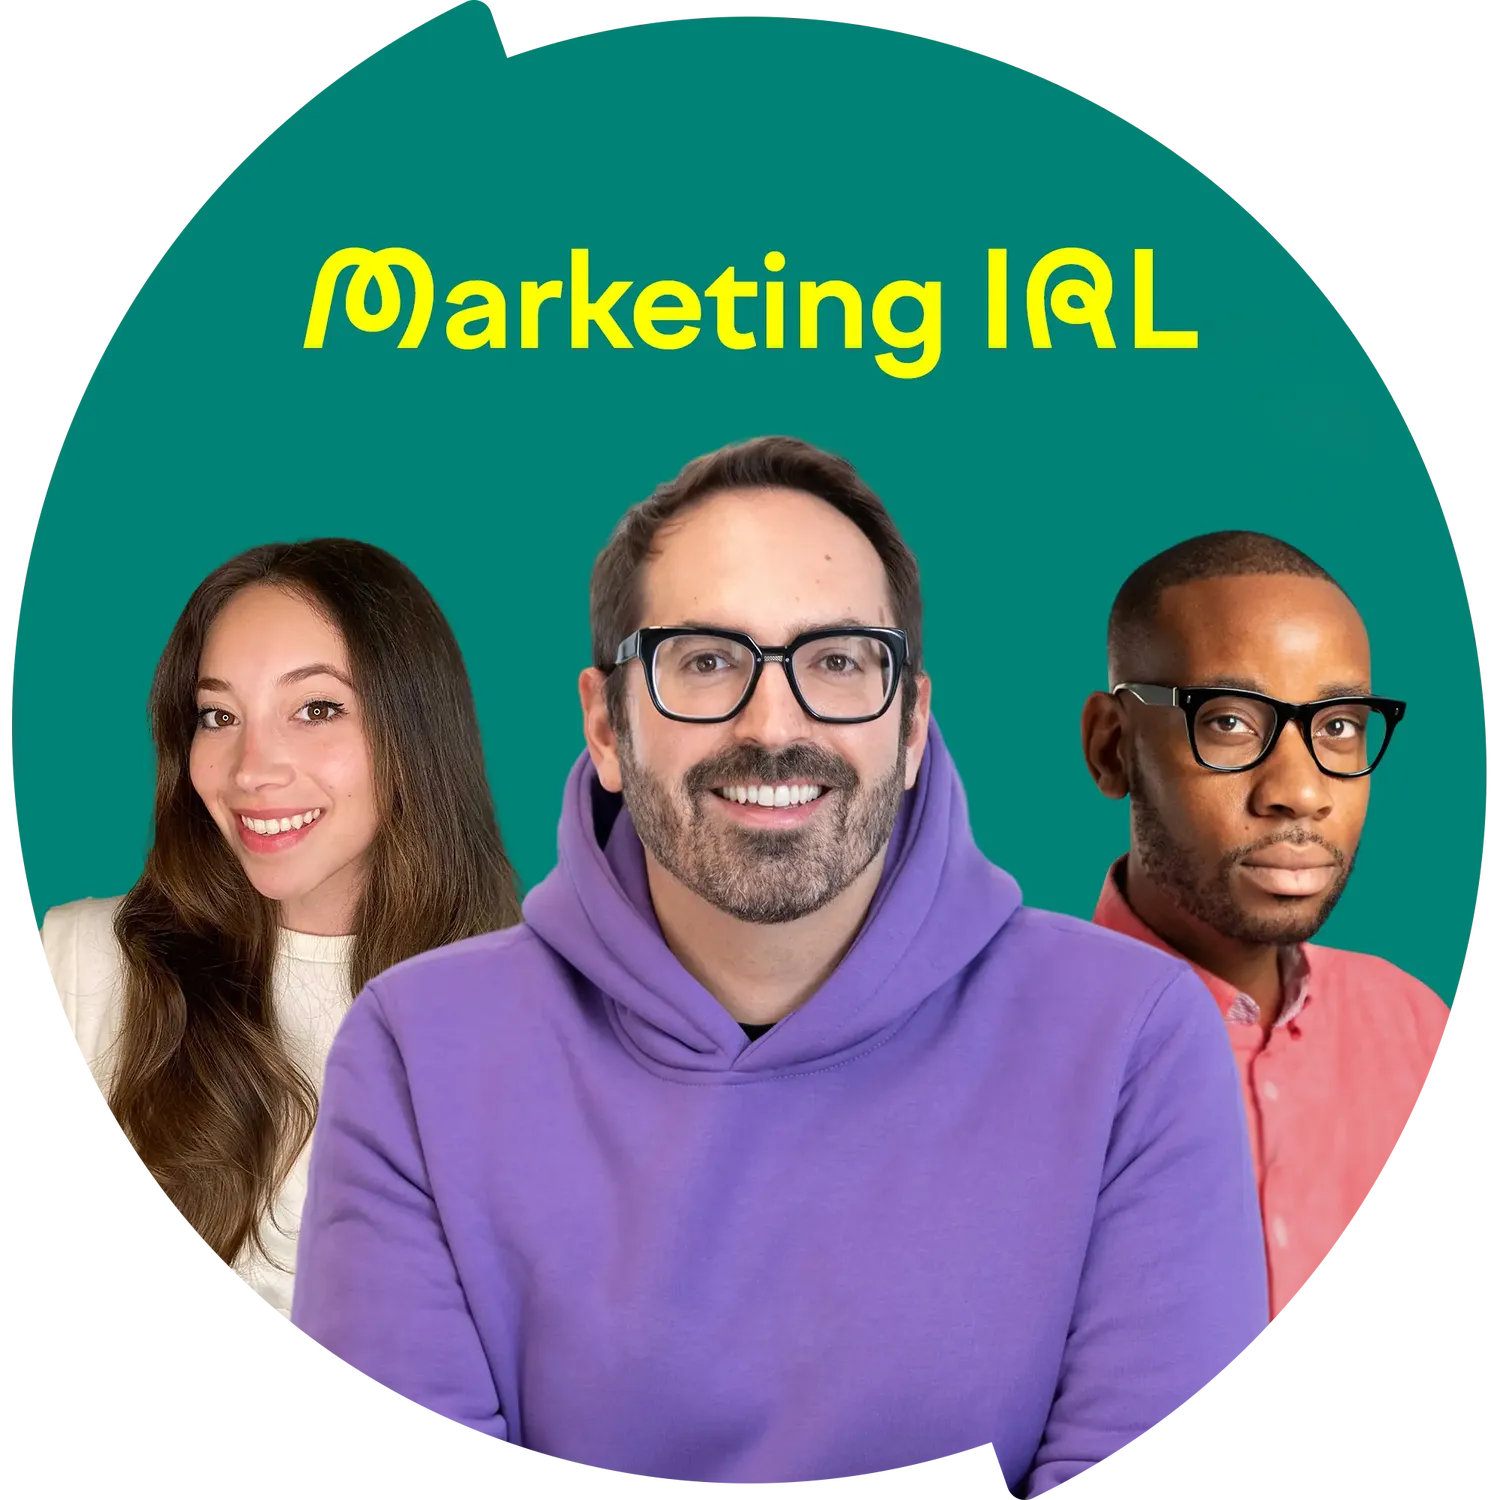 Marketing IRL: Inspiring Stories for the Next Generation of Digital Marketers